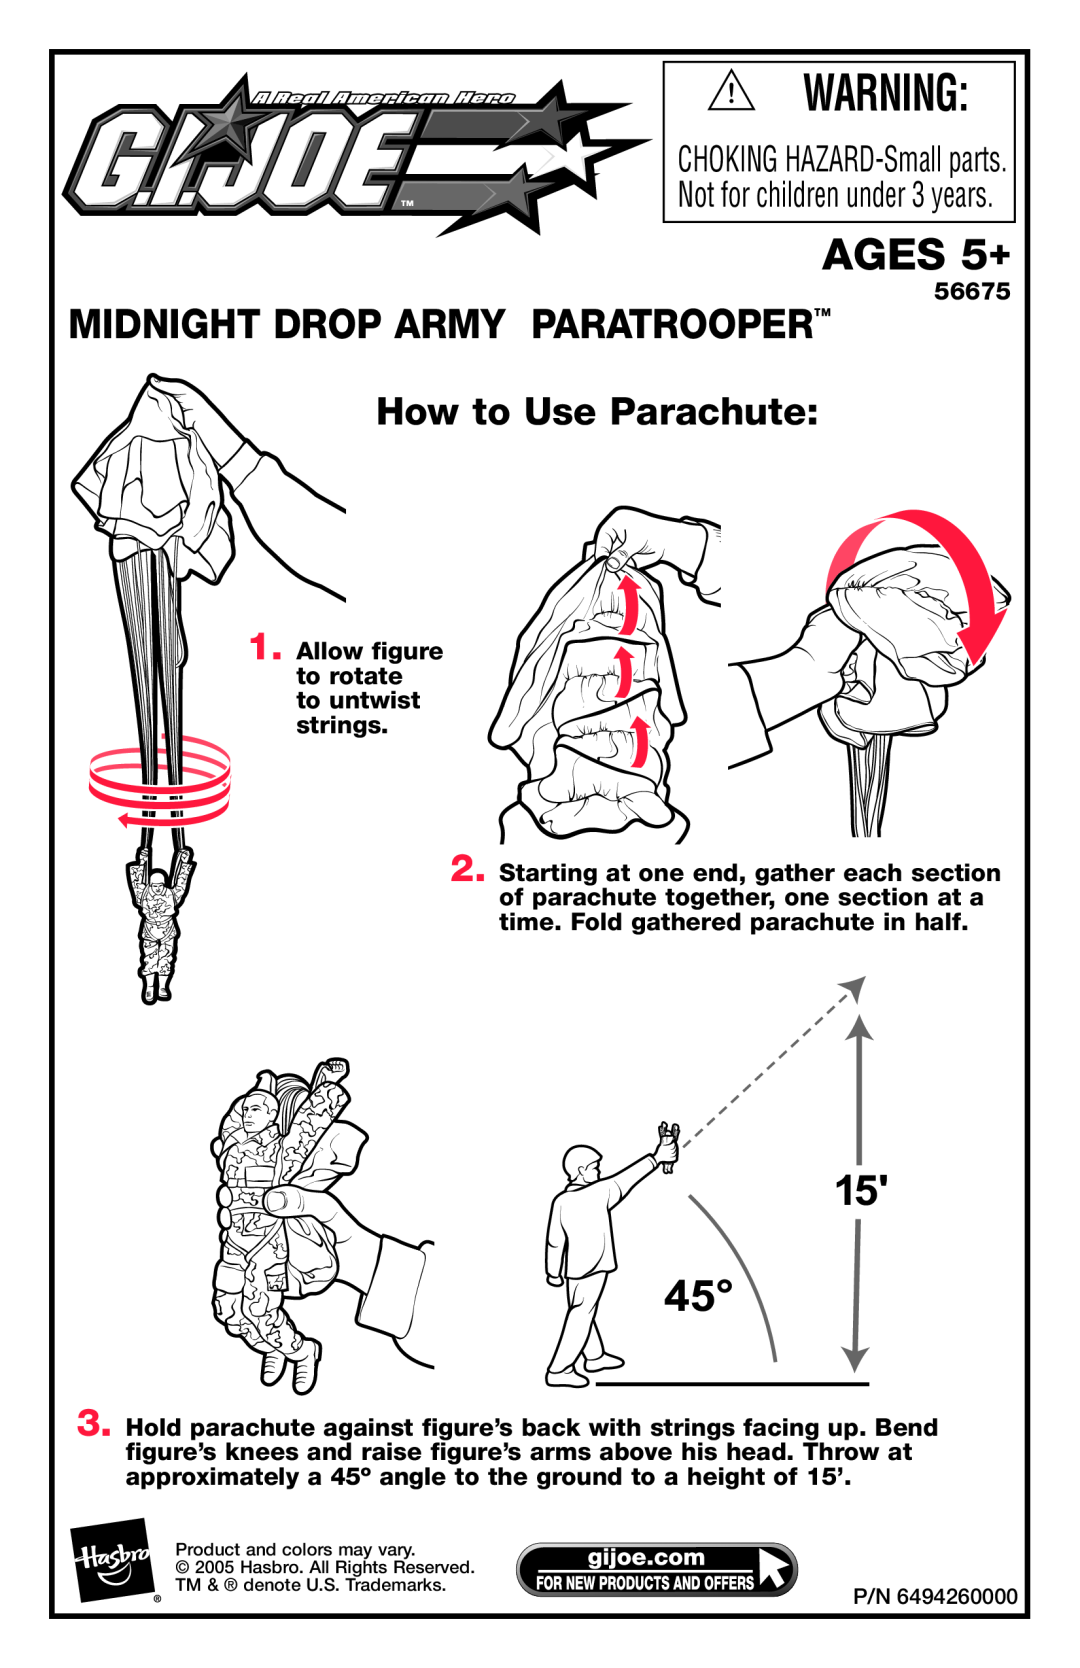 Hasbro 56675 manual AGES 5+, Midnight Drop Army Paratrooper, How to Use Parachute 